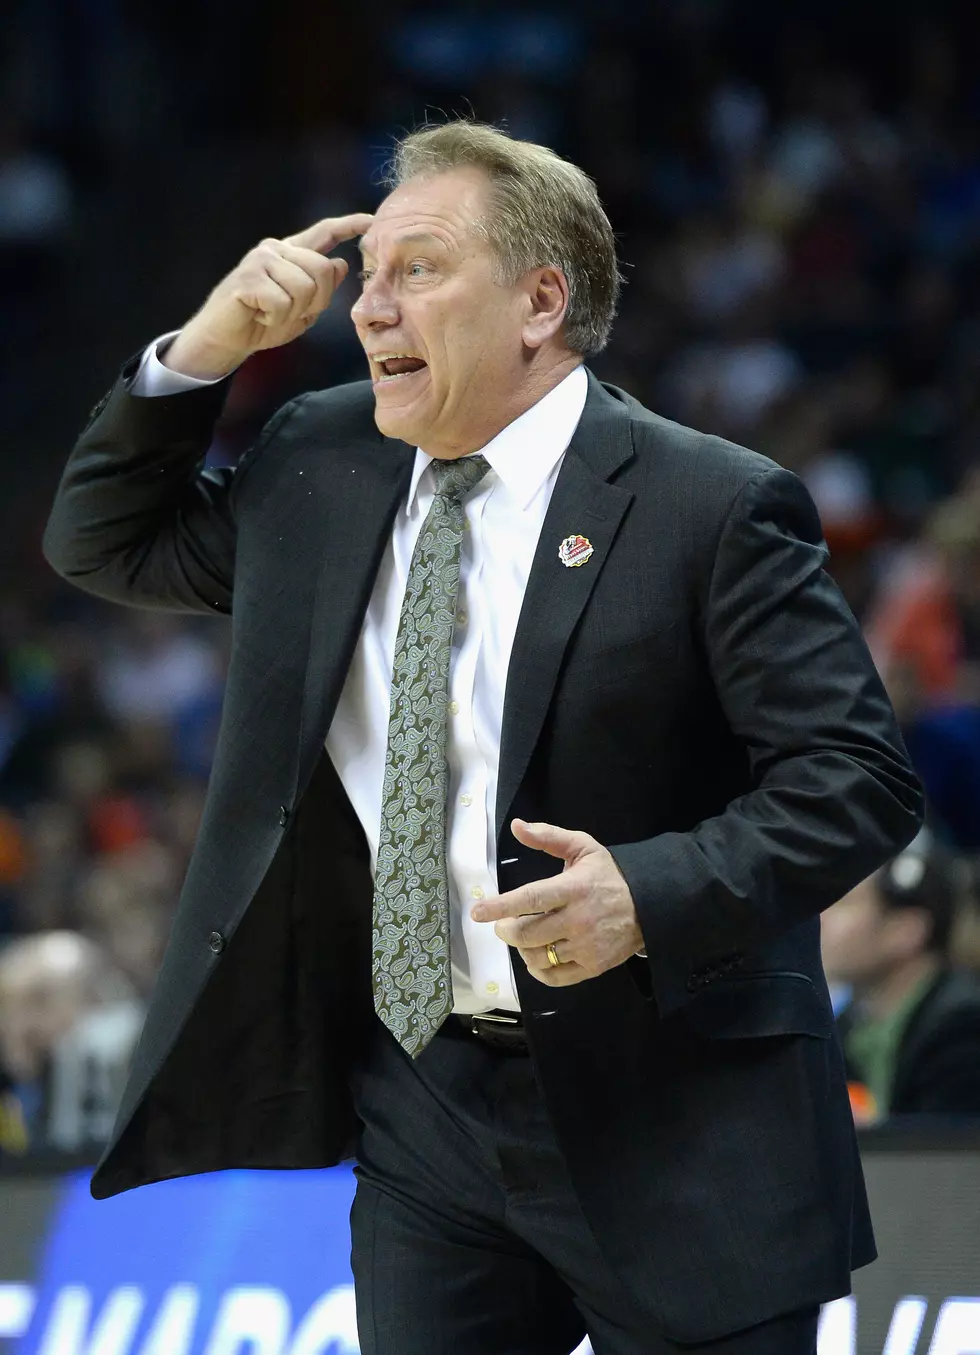 Tom Izzo Will Be Walking That Aisle Into The Hall of Fame